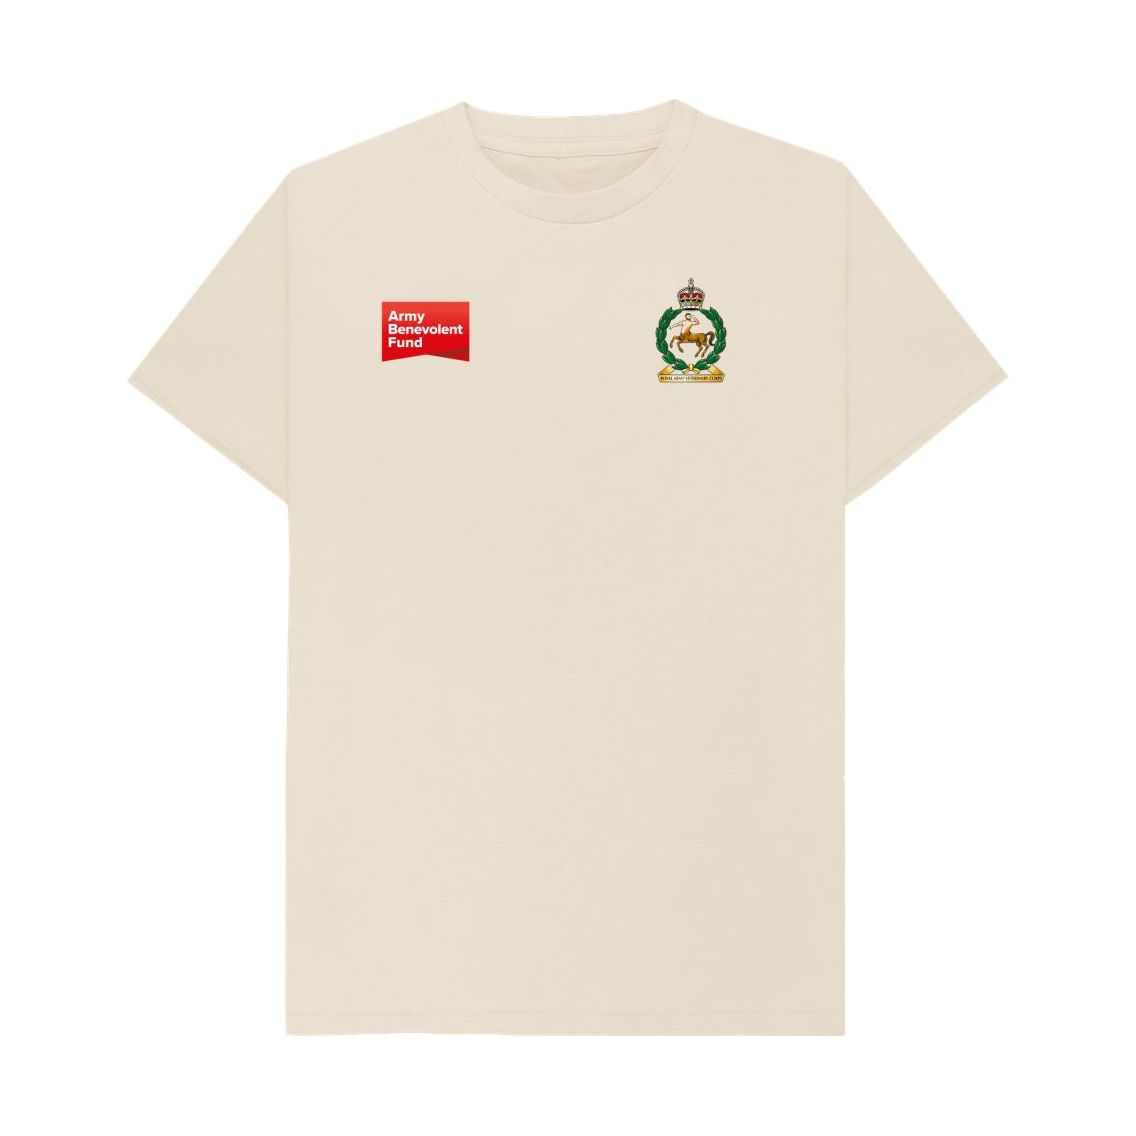 Royal Army Veterinary Corps Unisex T-shirt - Army Benevolent Fund